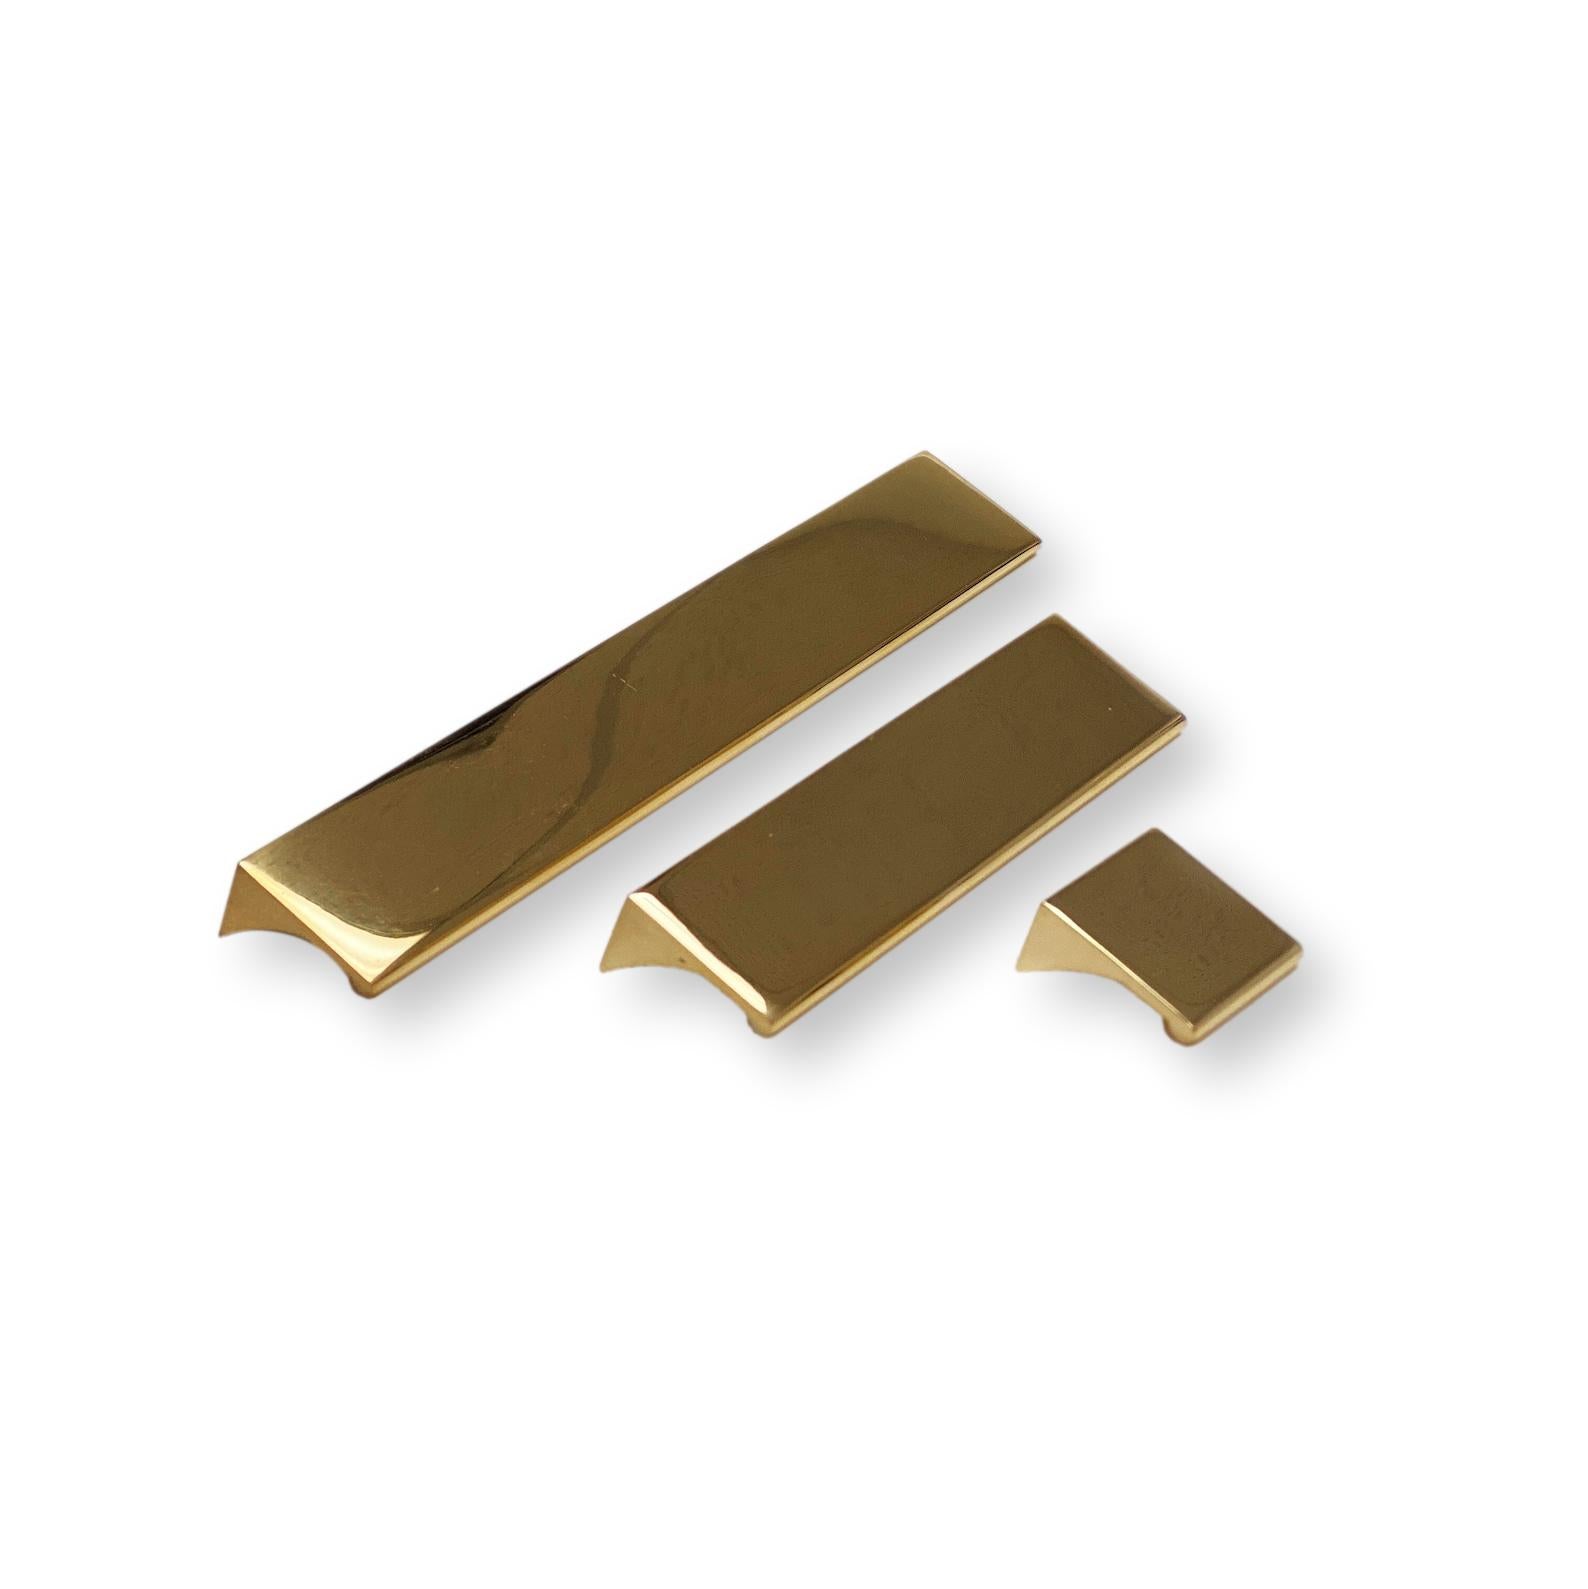 Polished Unlacquered Brass "Graham" Tab Drawer Pull - Industry Hardware